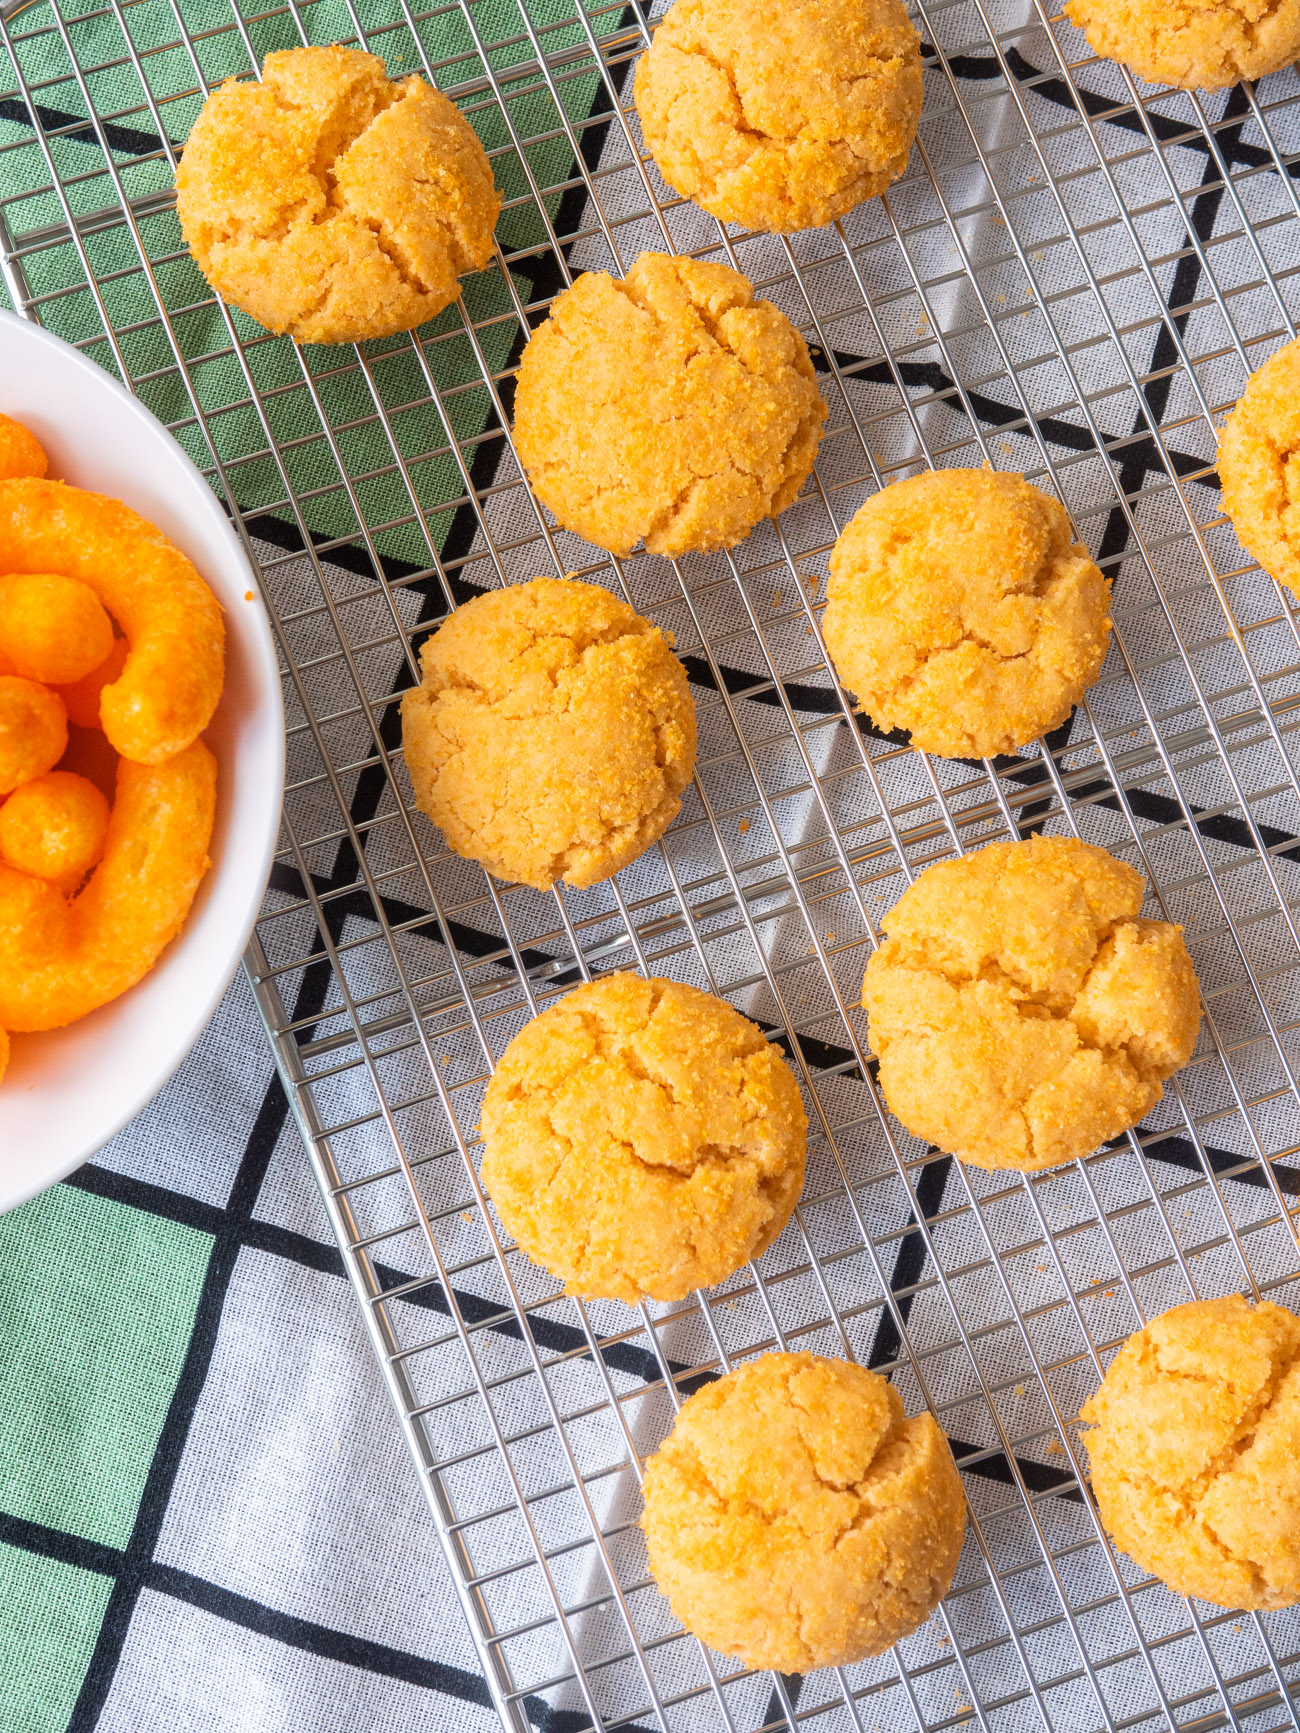 Cheetos cookies on a cookie sheet